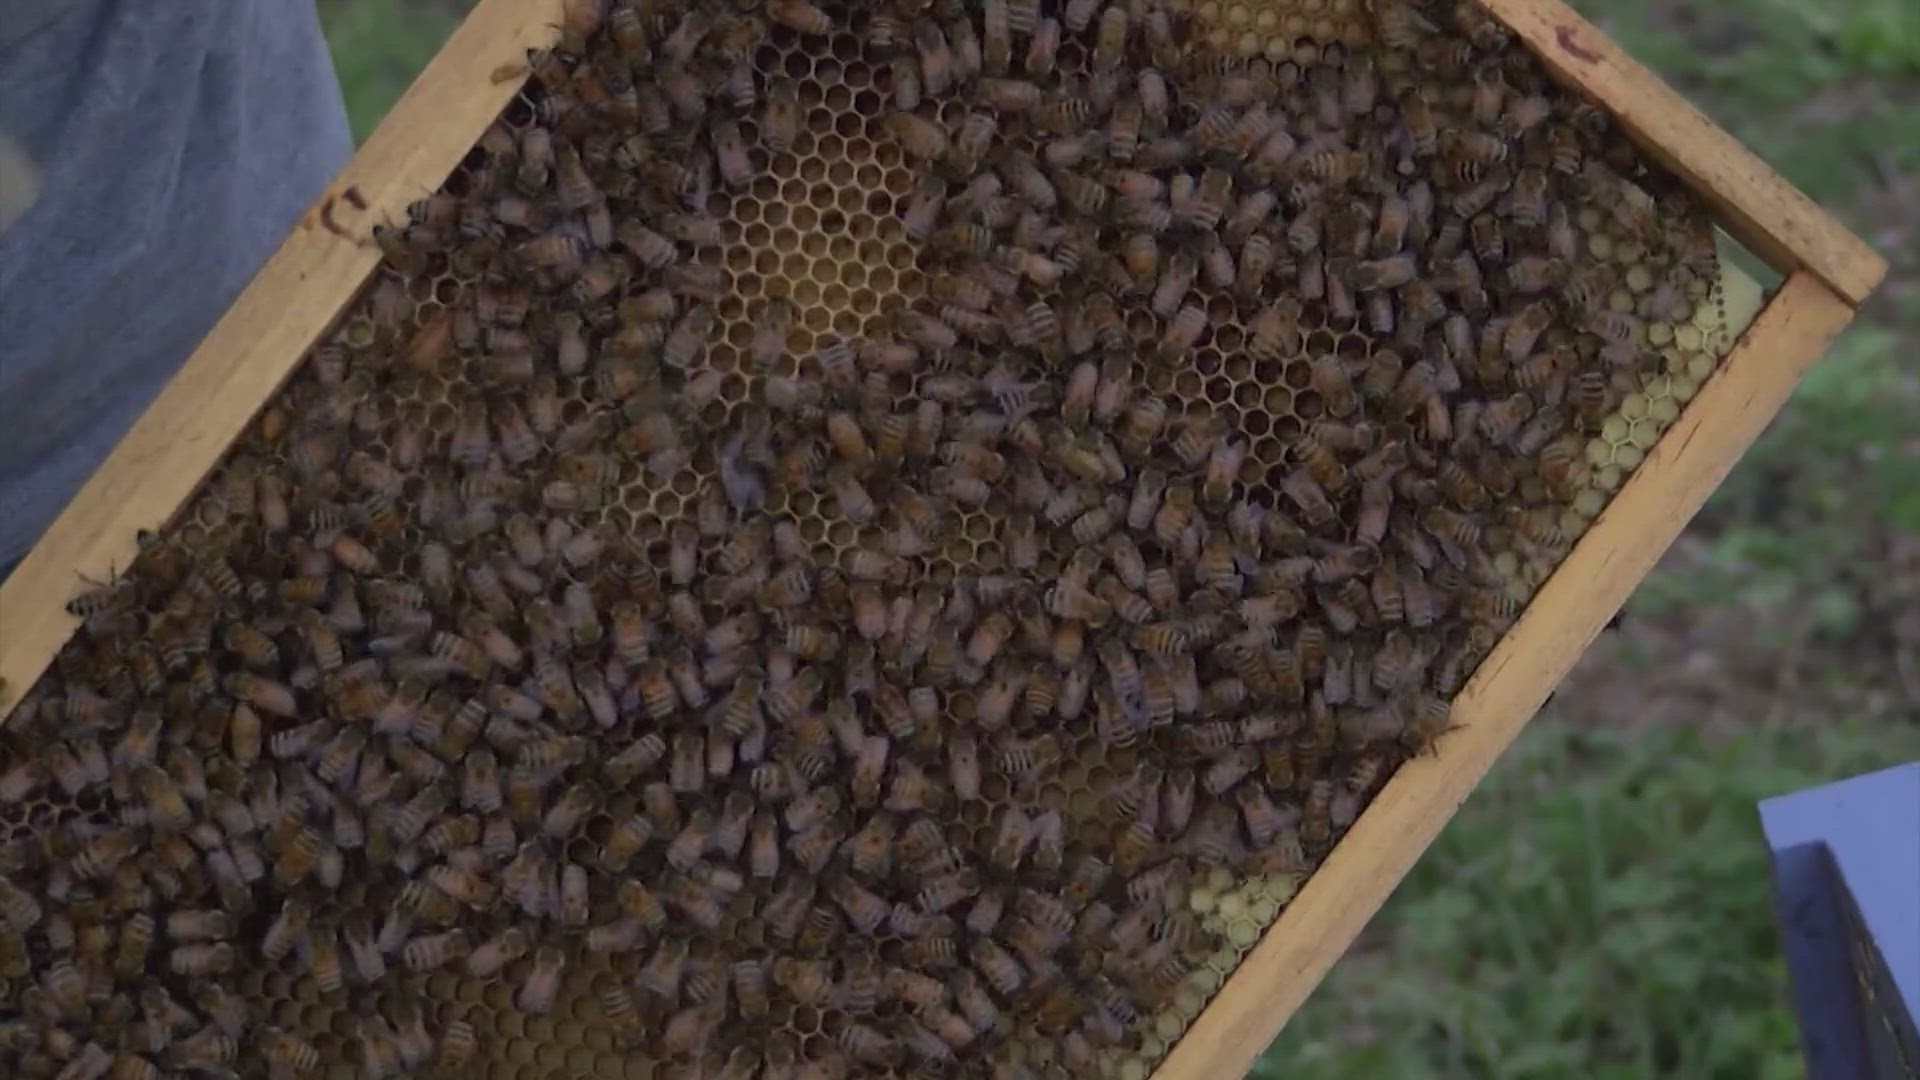 A North Carolina man says someone took more than a million bees from his yard. A hive can fetch up to $200 on the black market.